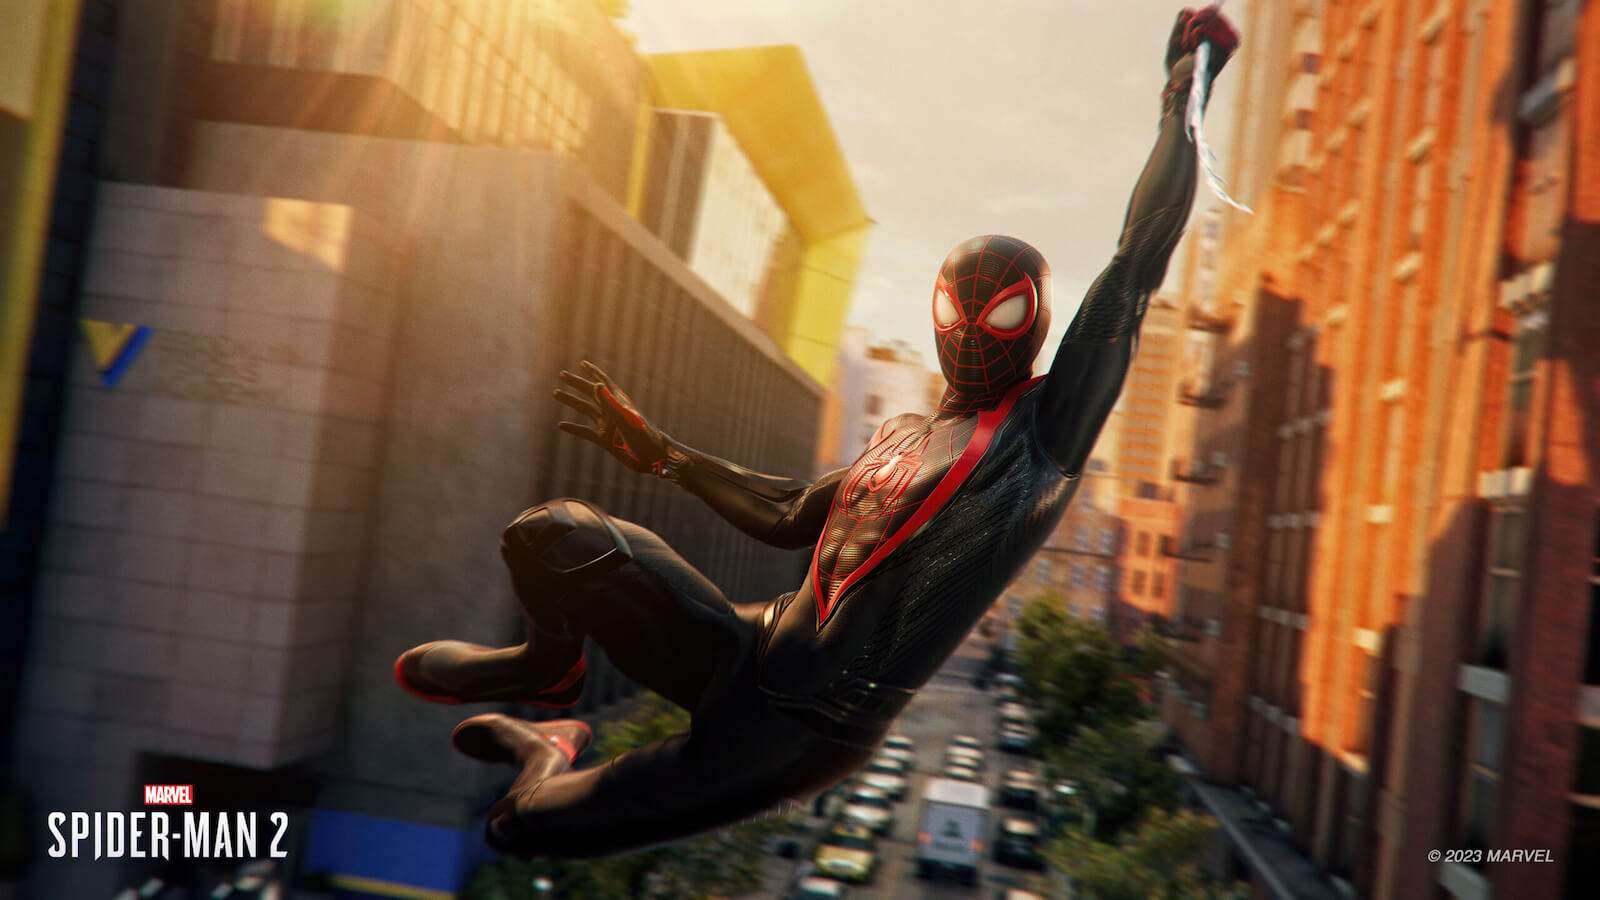 Spider-Man 2 player discovers glitch that changes time of day